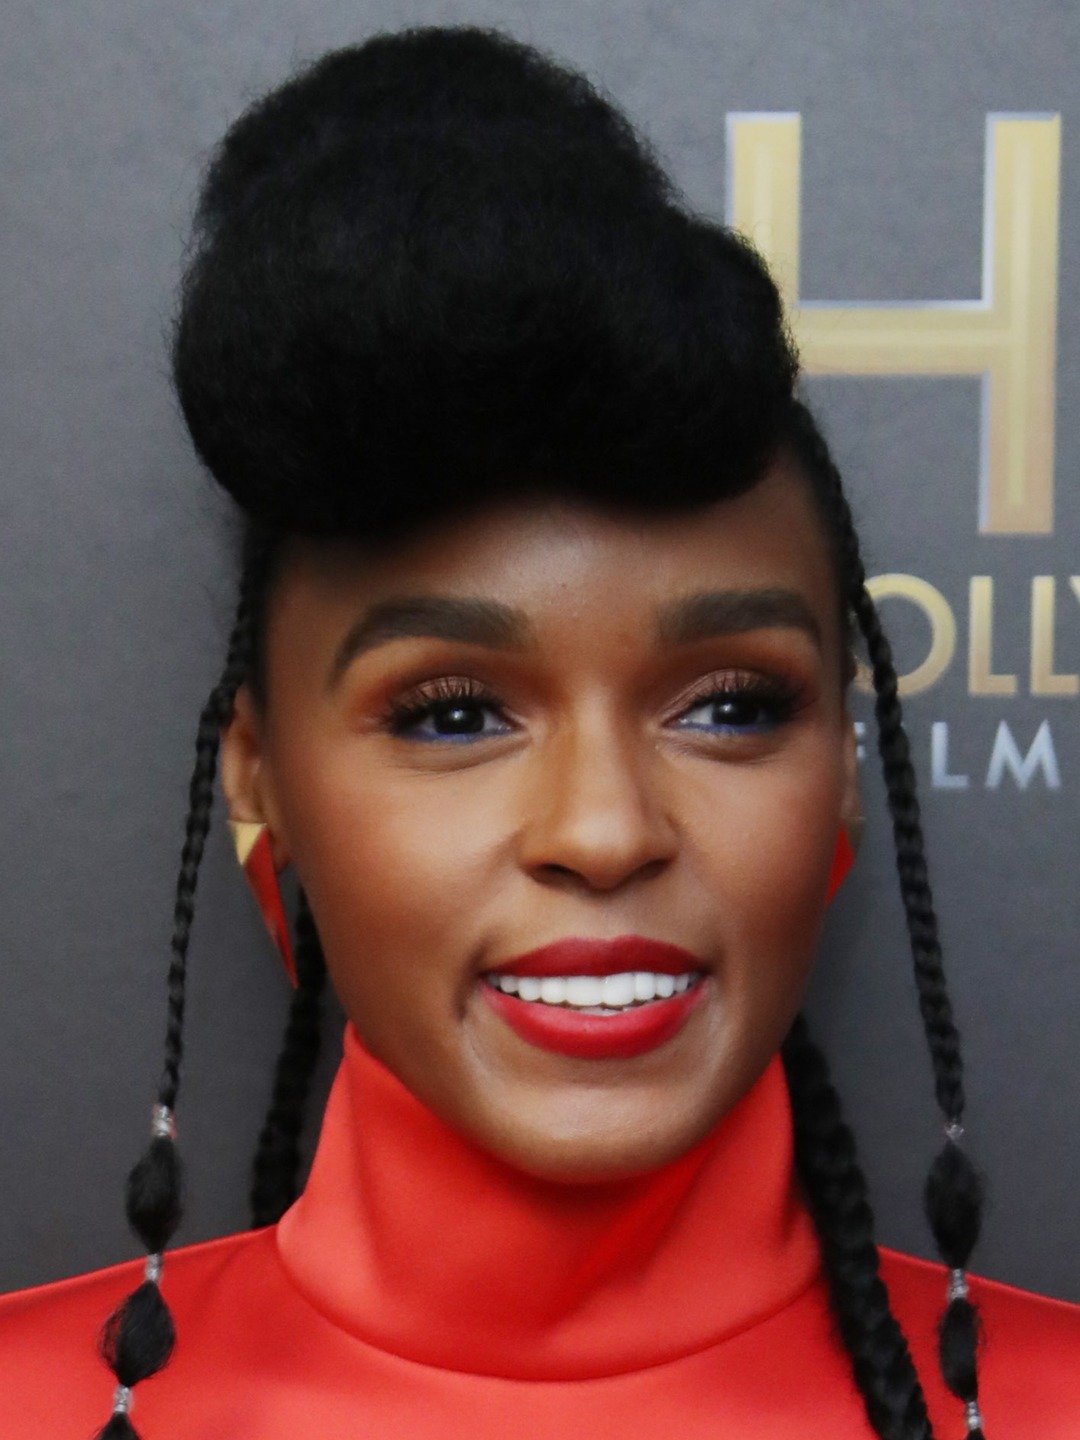 How tall is Janelle Monae?